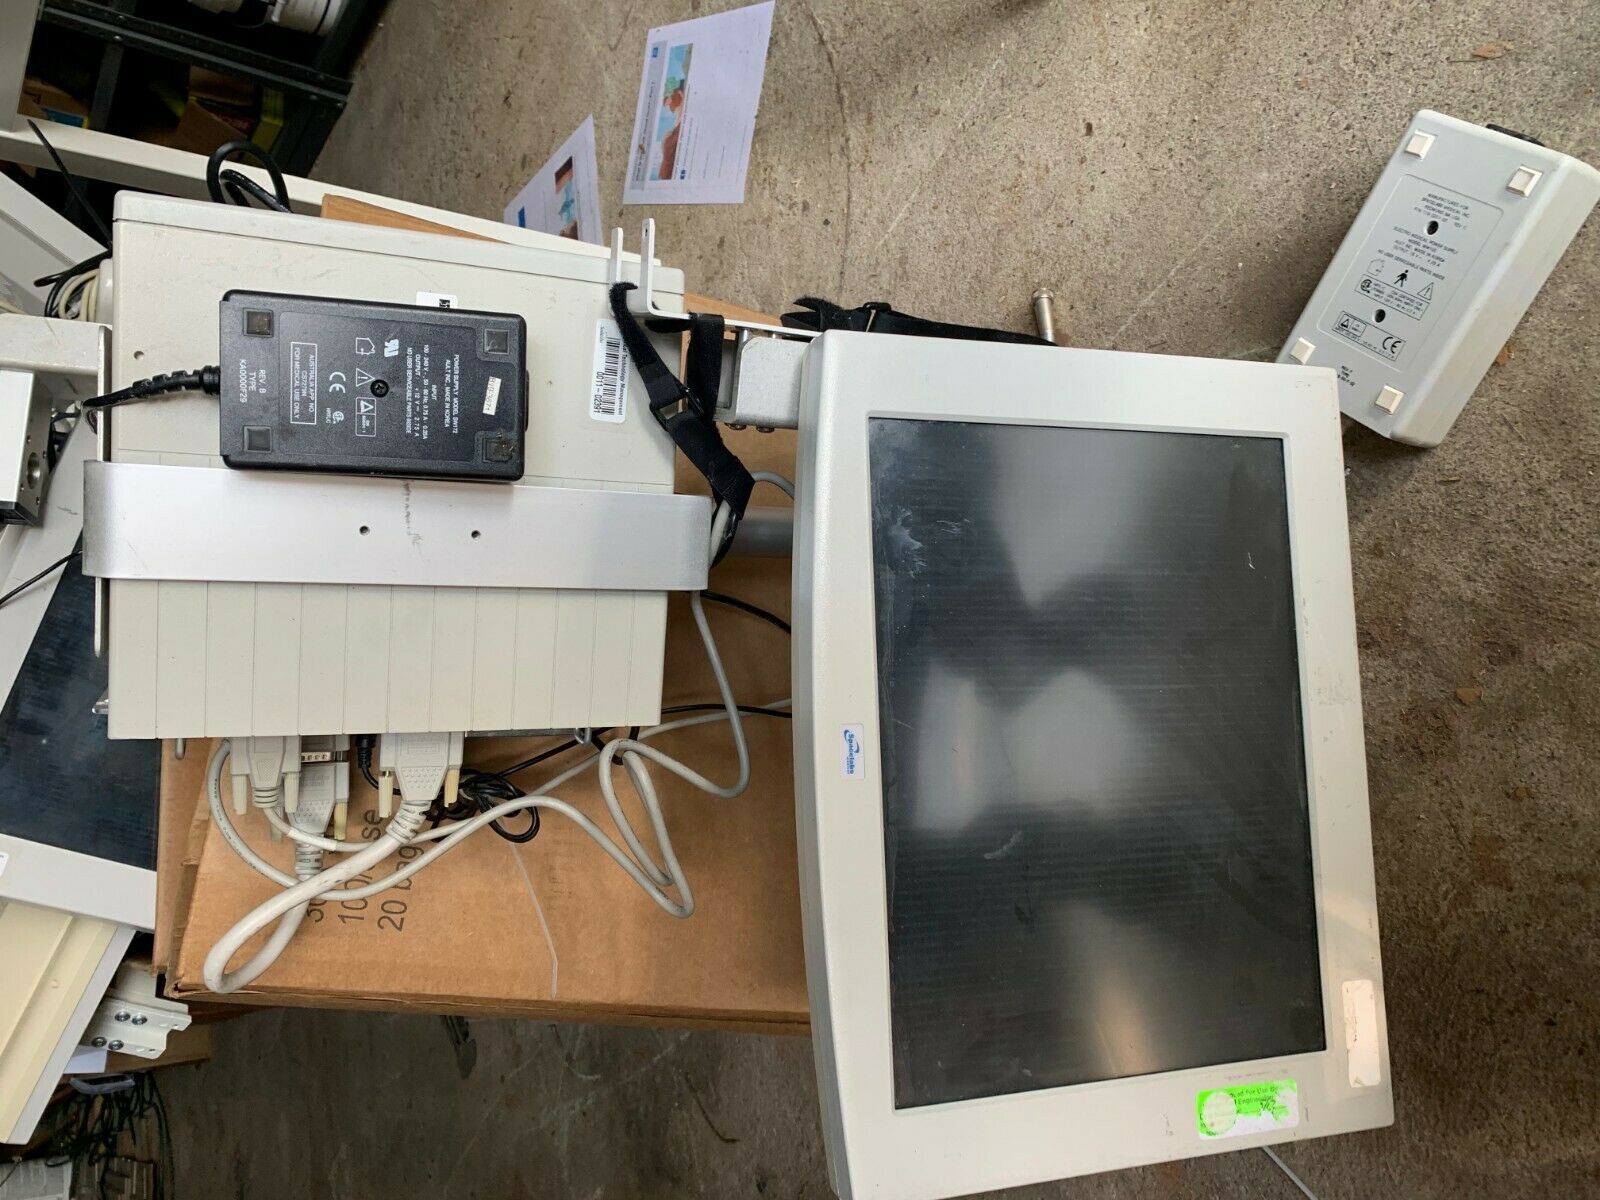 Spacelabs Healthcare 91415-A Patient Monitor & wall mount 509DM and box DIAGNOSTIC ULTRASOUND MACHINES FOR SALE